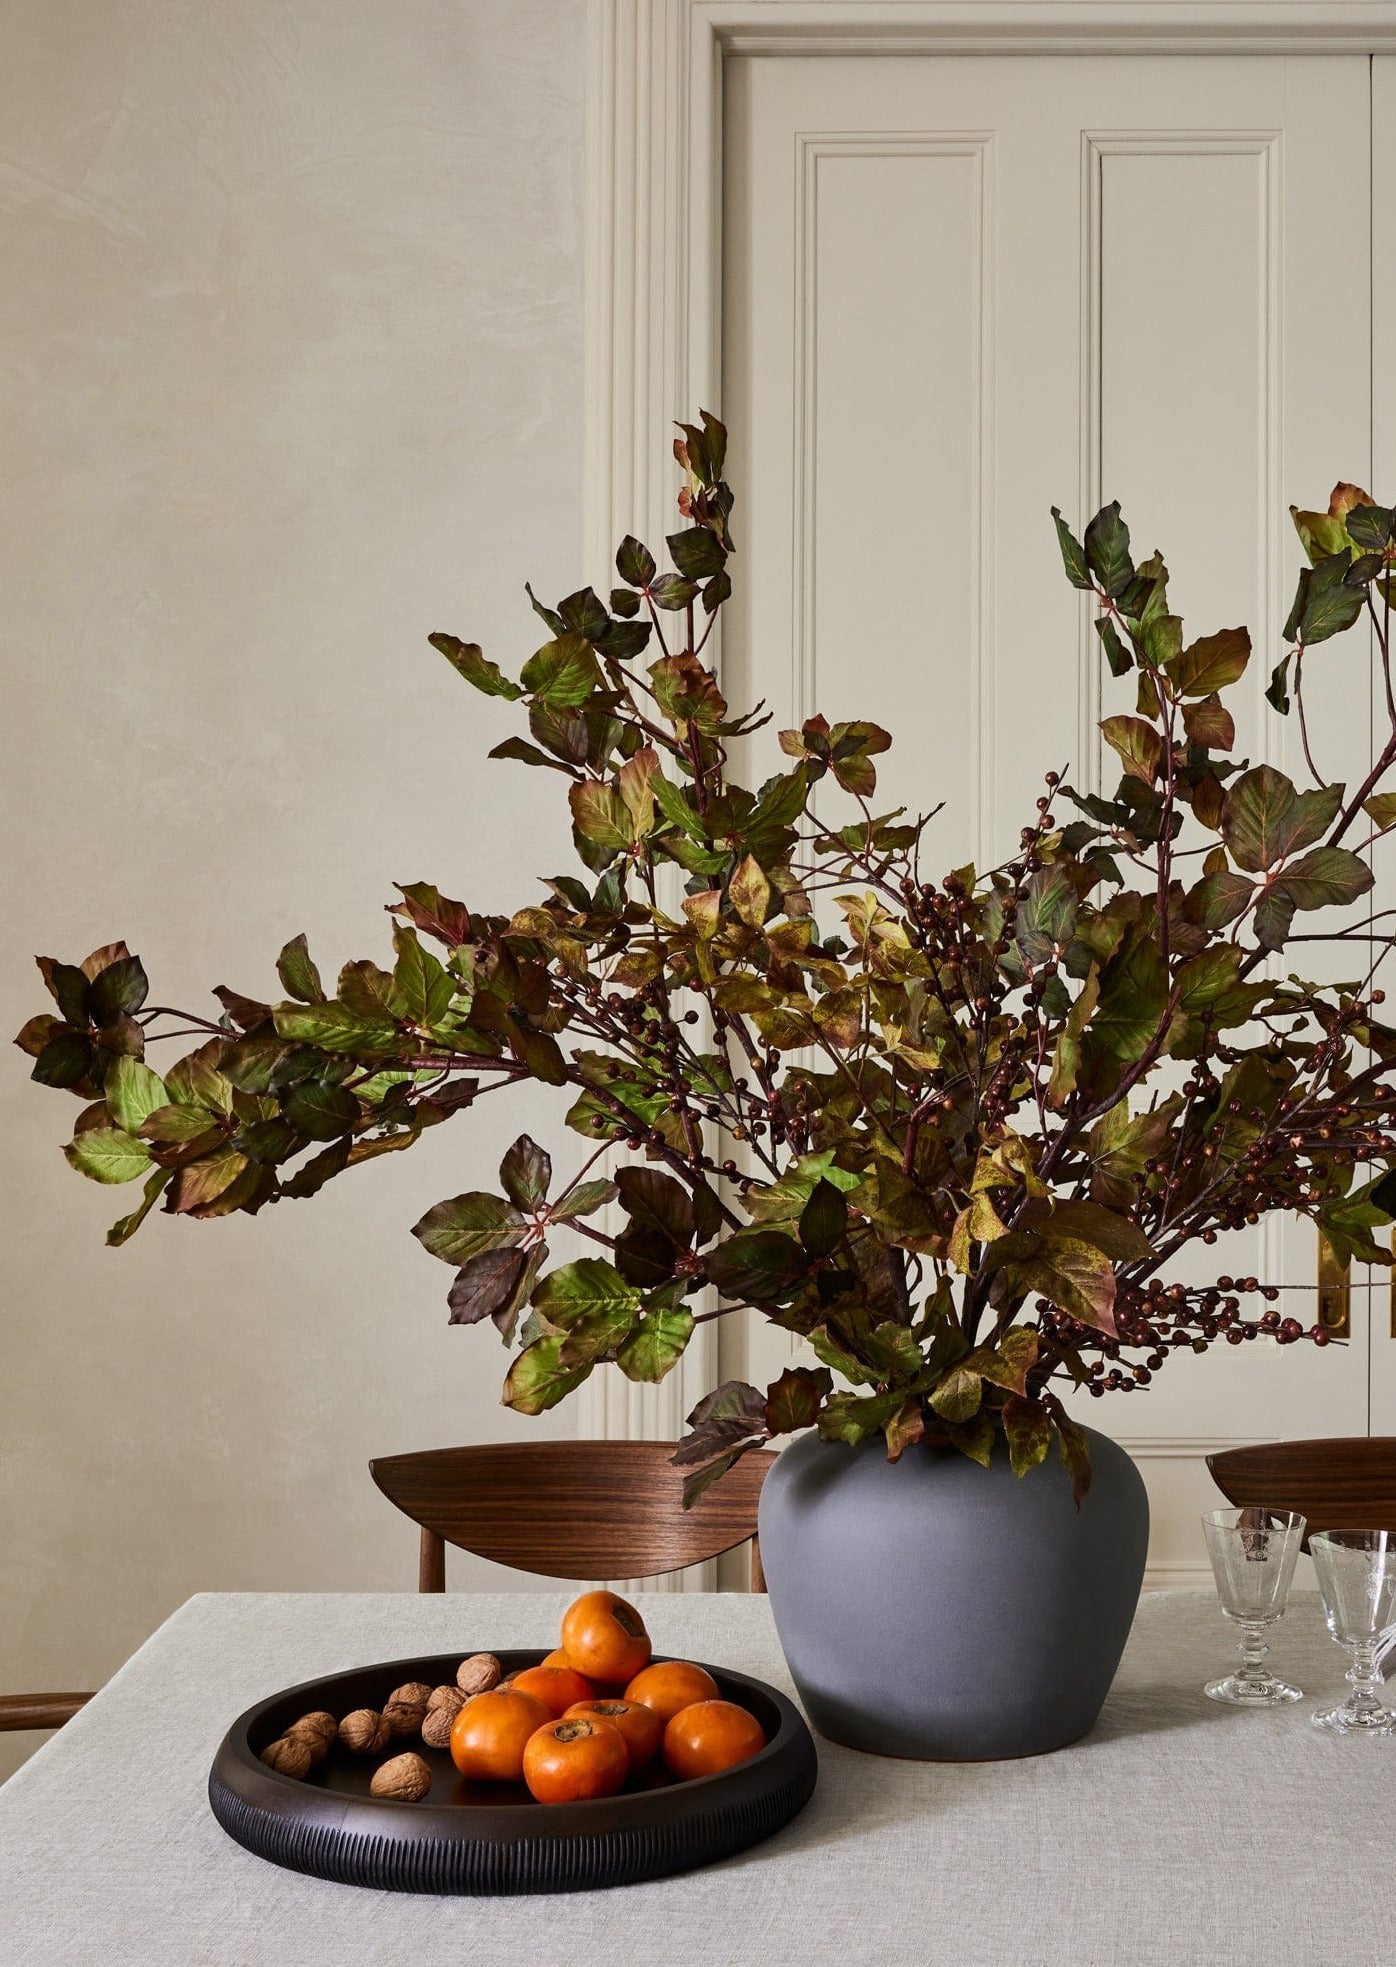 Faux Ilex Berry Branches Styled with Chestnut Branches in Slate Vase